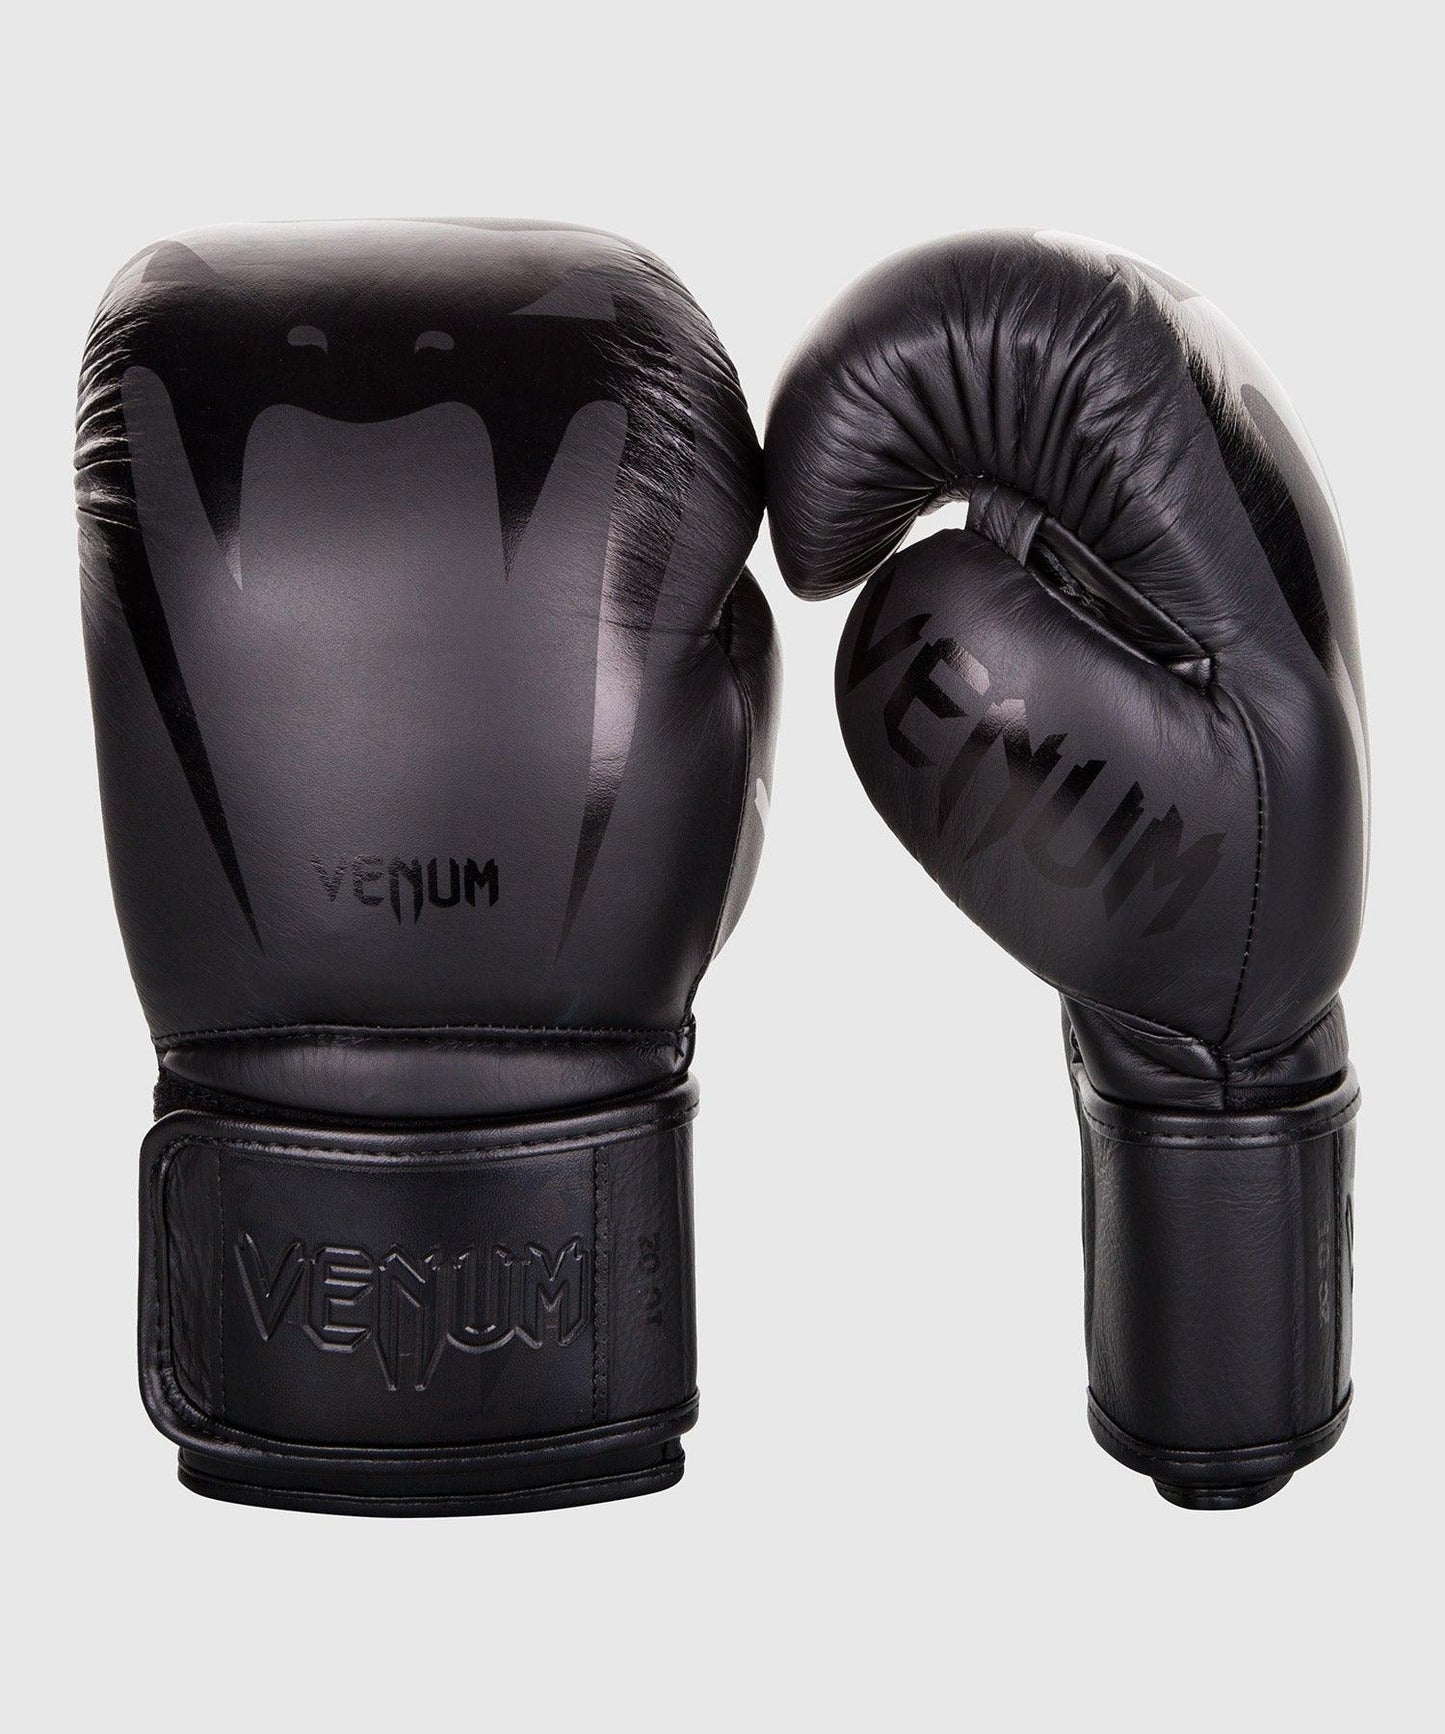 Venum Giant 3.0 Boxing Gloves - Nappa Leather - Black/Black Picture 2